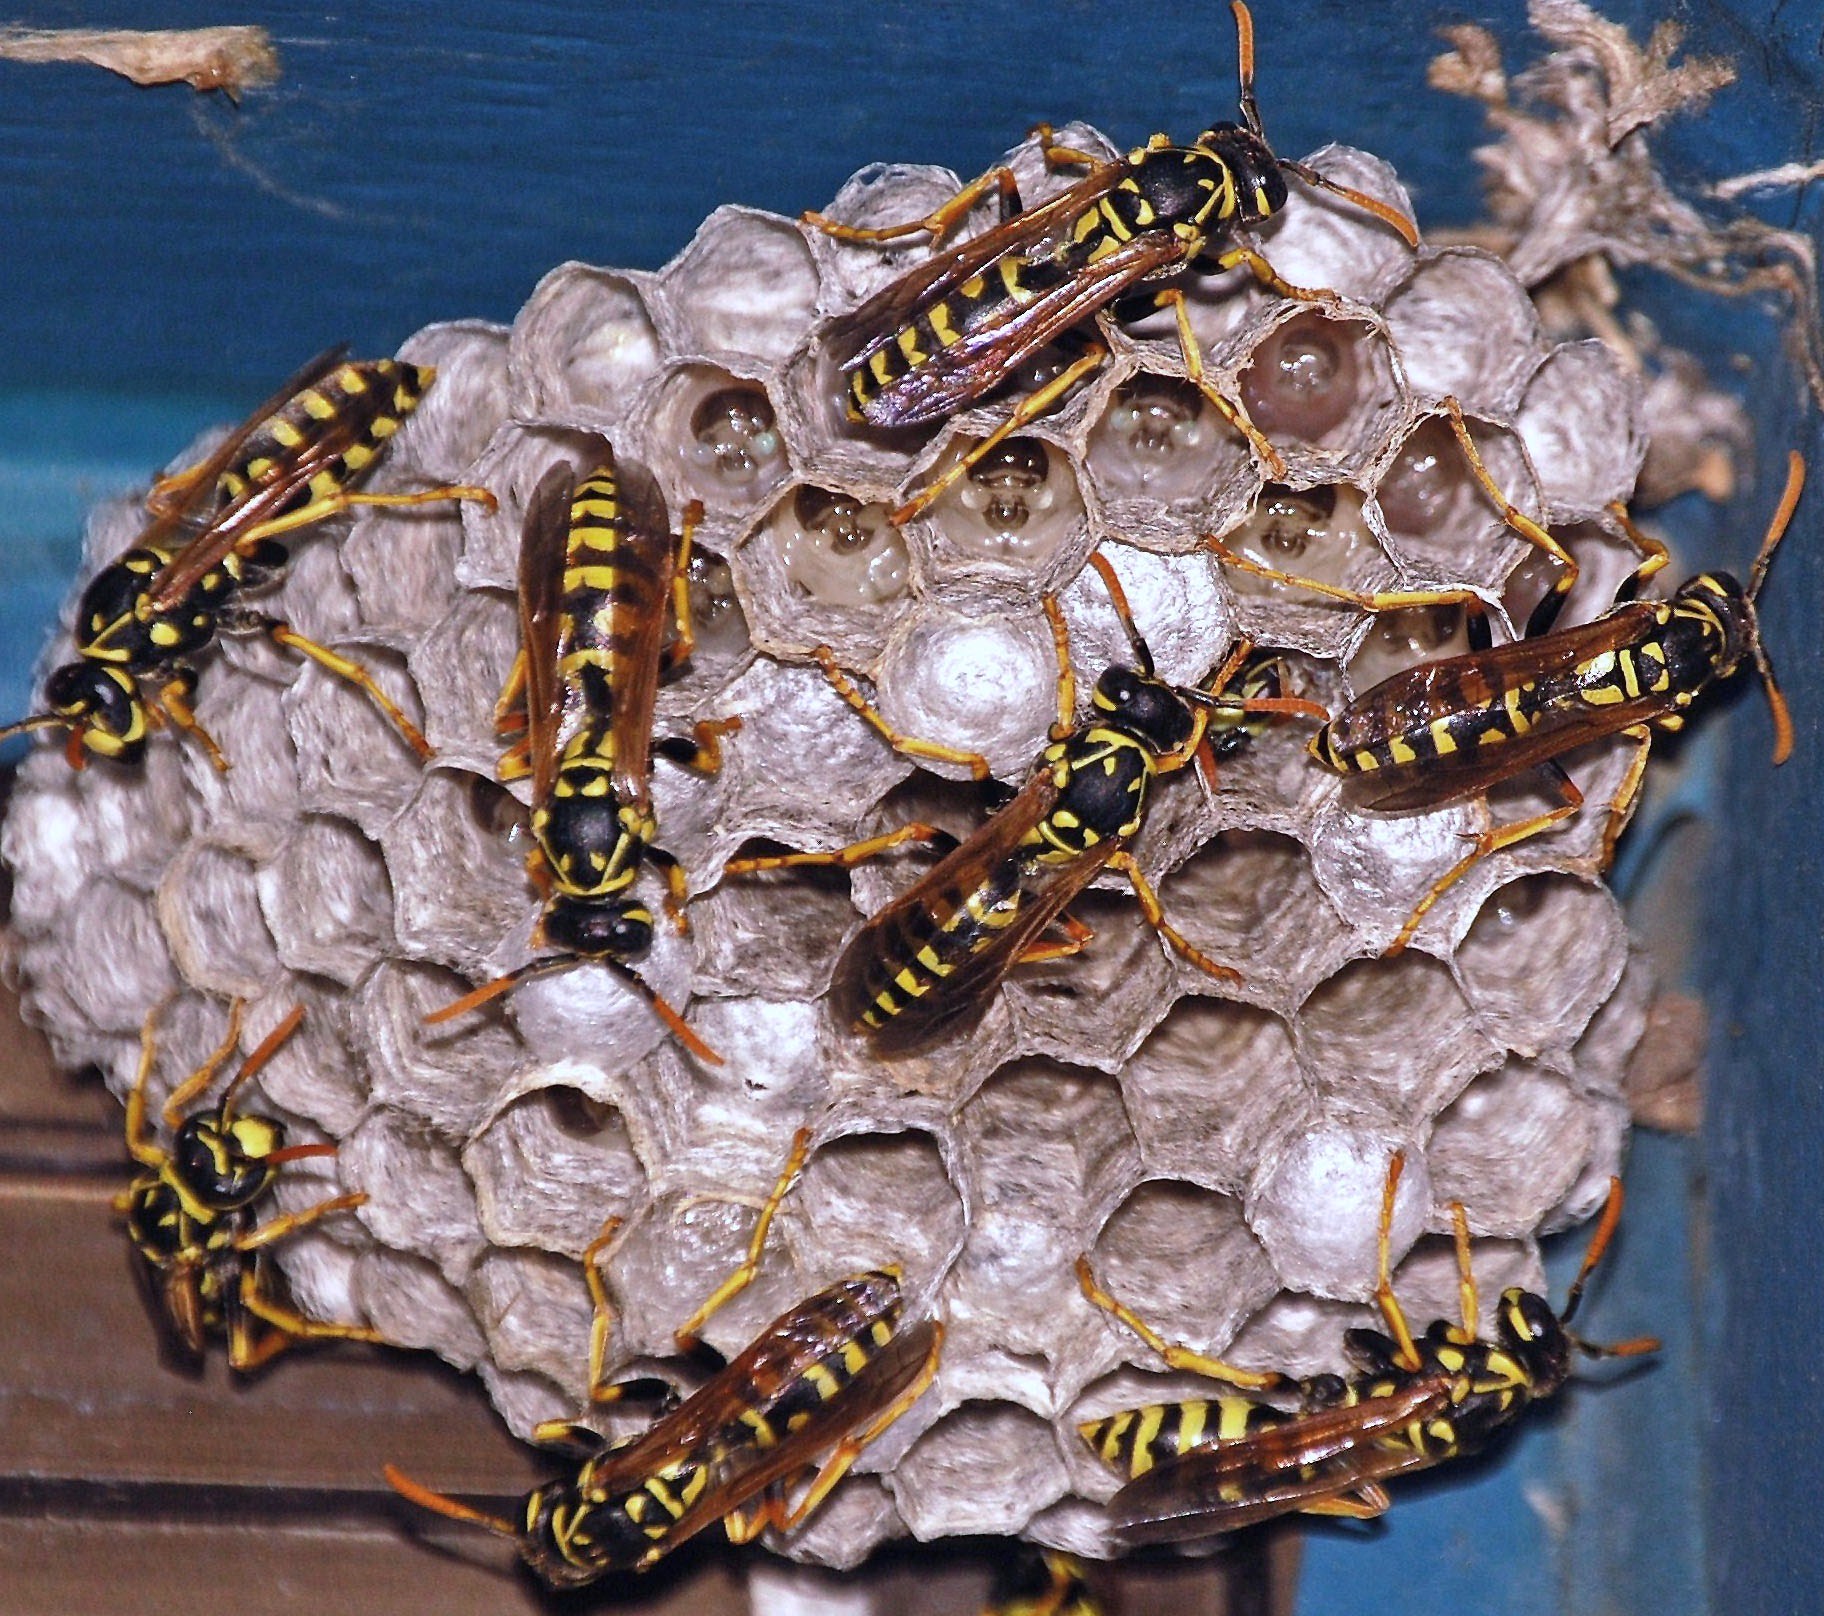 Social wasps constructing a paper nest